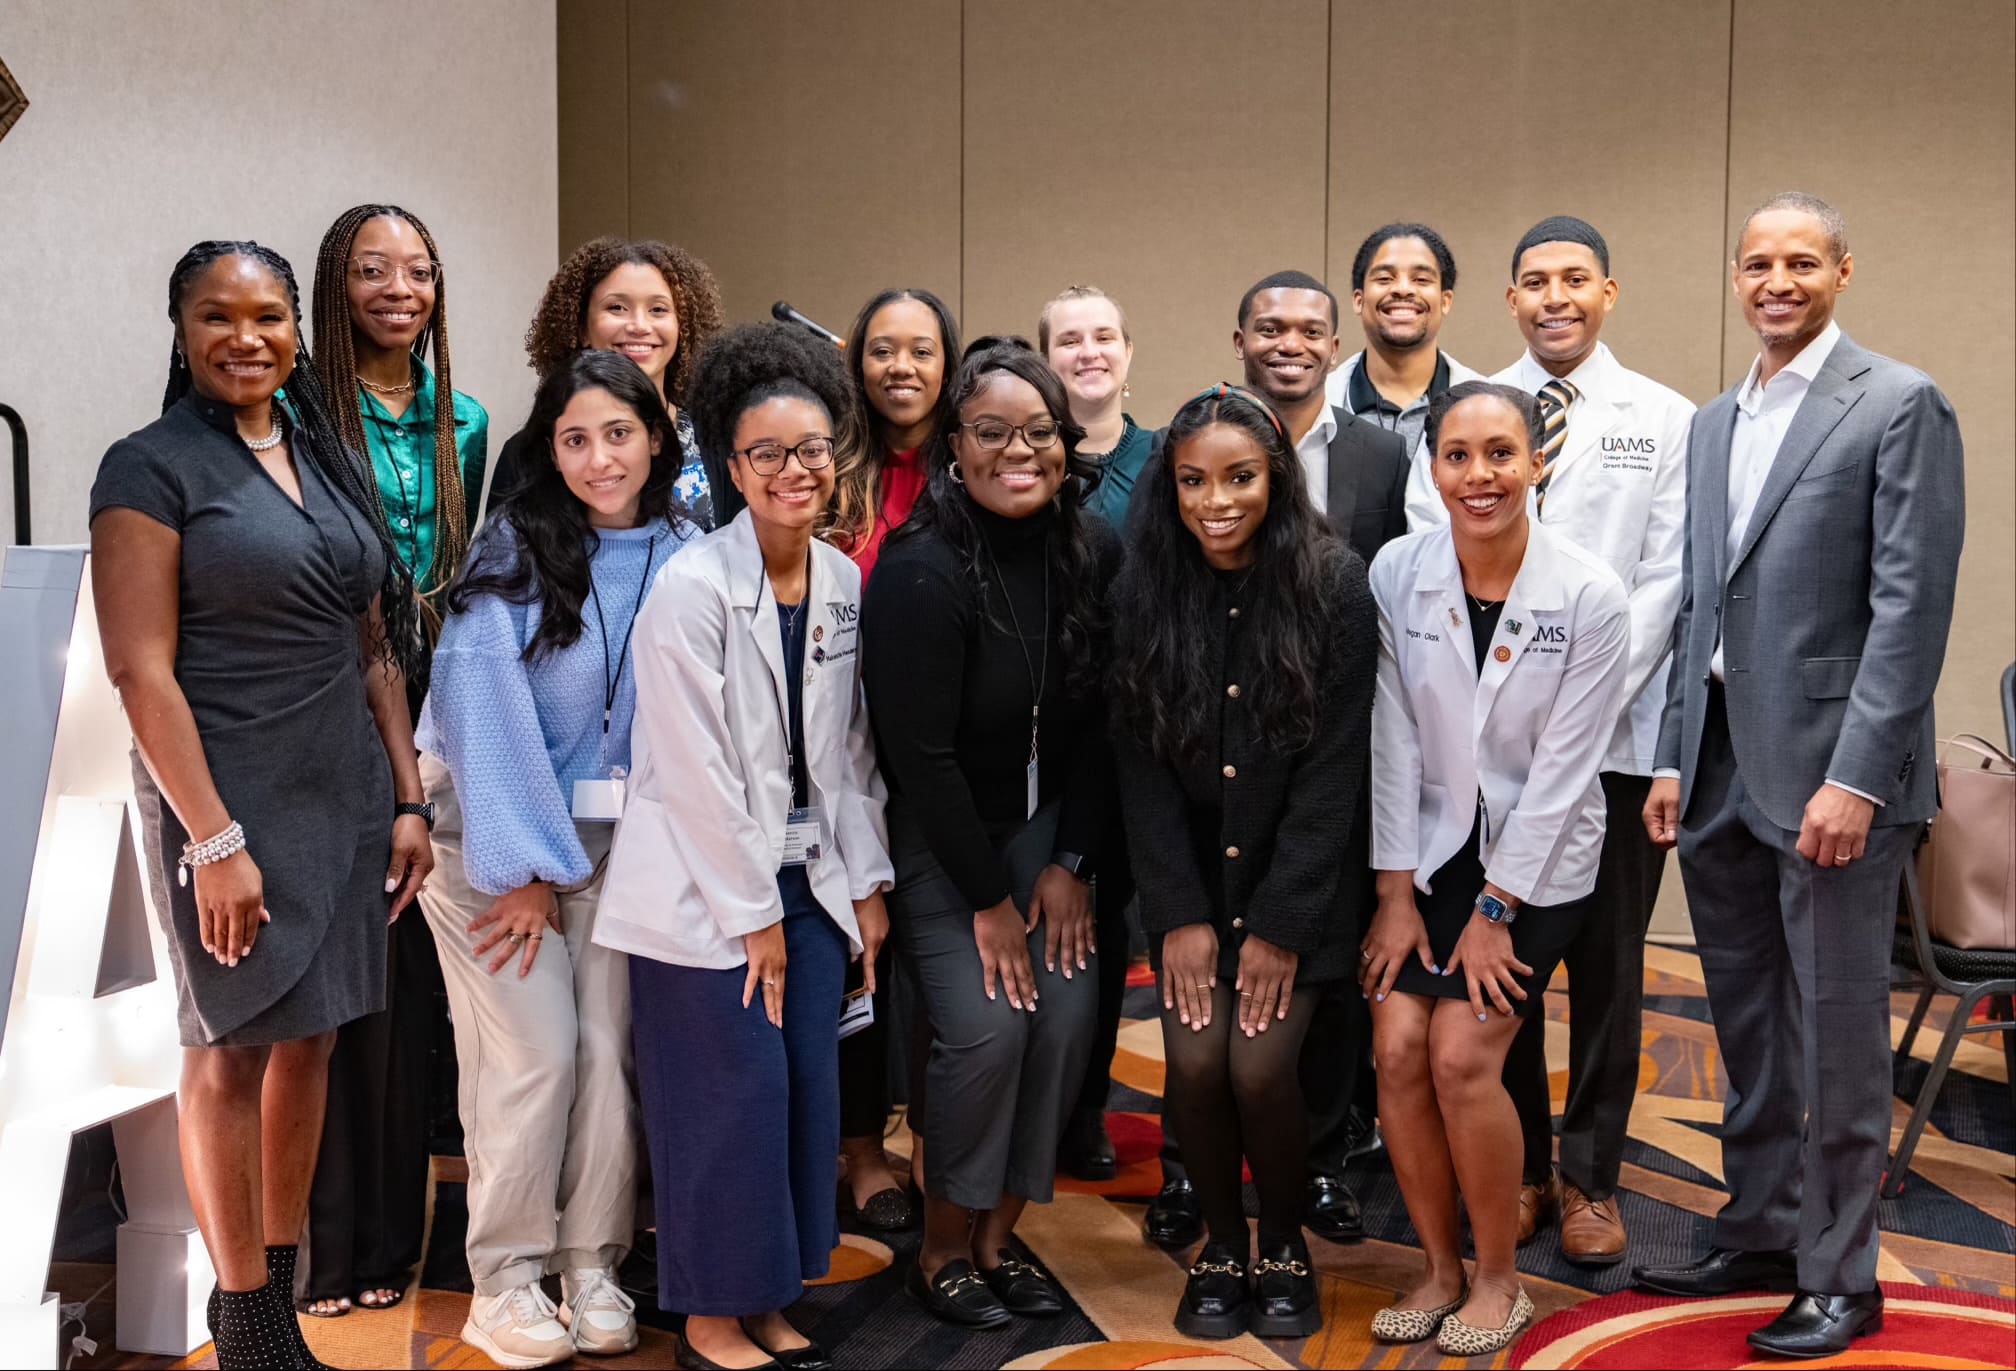 Standing group photo at the event. Among those attending the regional conference were (left to right, front row): Christy Walker, M.D., UAMS medical students Victoria Malak, Makenzie Henderson, Brianna Long, Kayla Jimmerson and Megan Clark, and Torrance Walker, M.D.; back row: medical students Raven Hinton, Andria Carter, Bree Dulaney, Jade-Michael Matthews, Evan Hicks, Quincy Gragg and Grant Broadway.